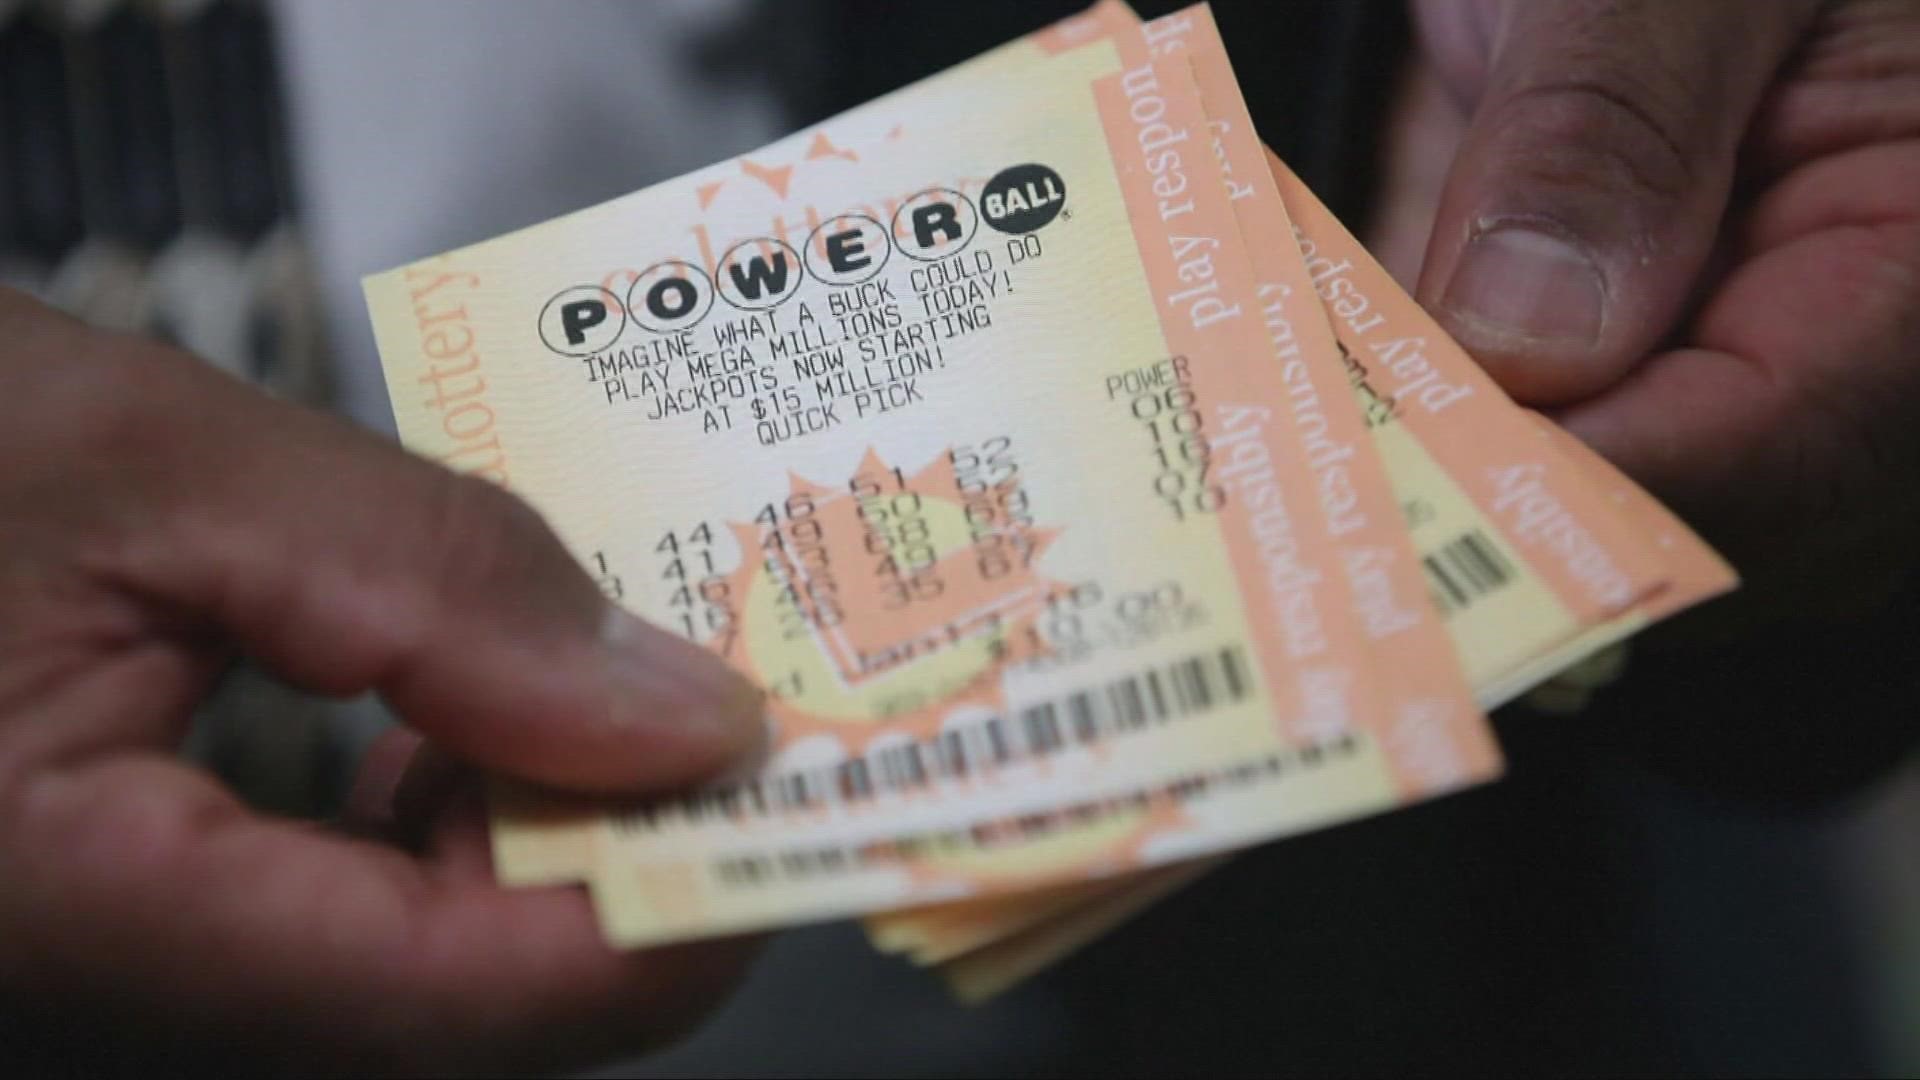 The grand prize ticket worth more than $2 billion was sold in California.